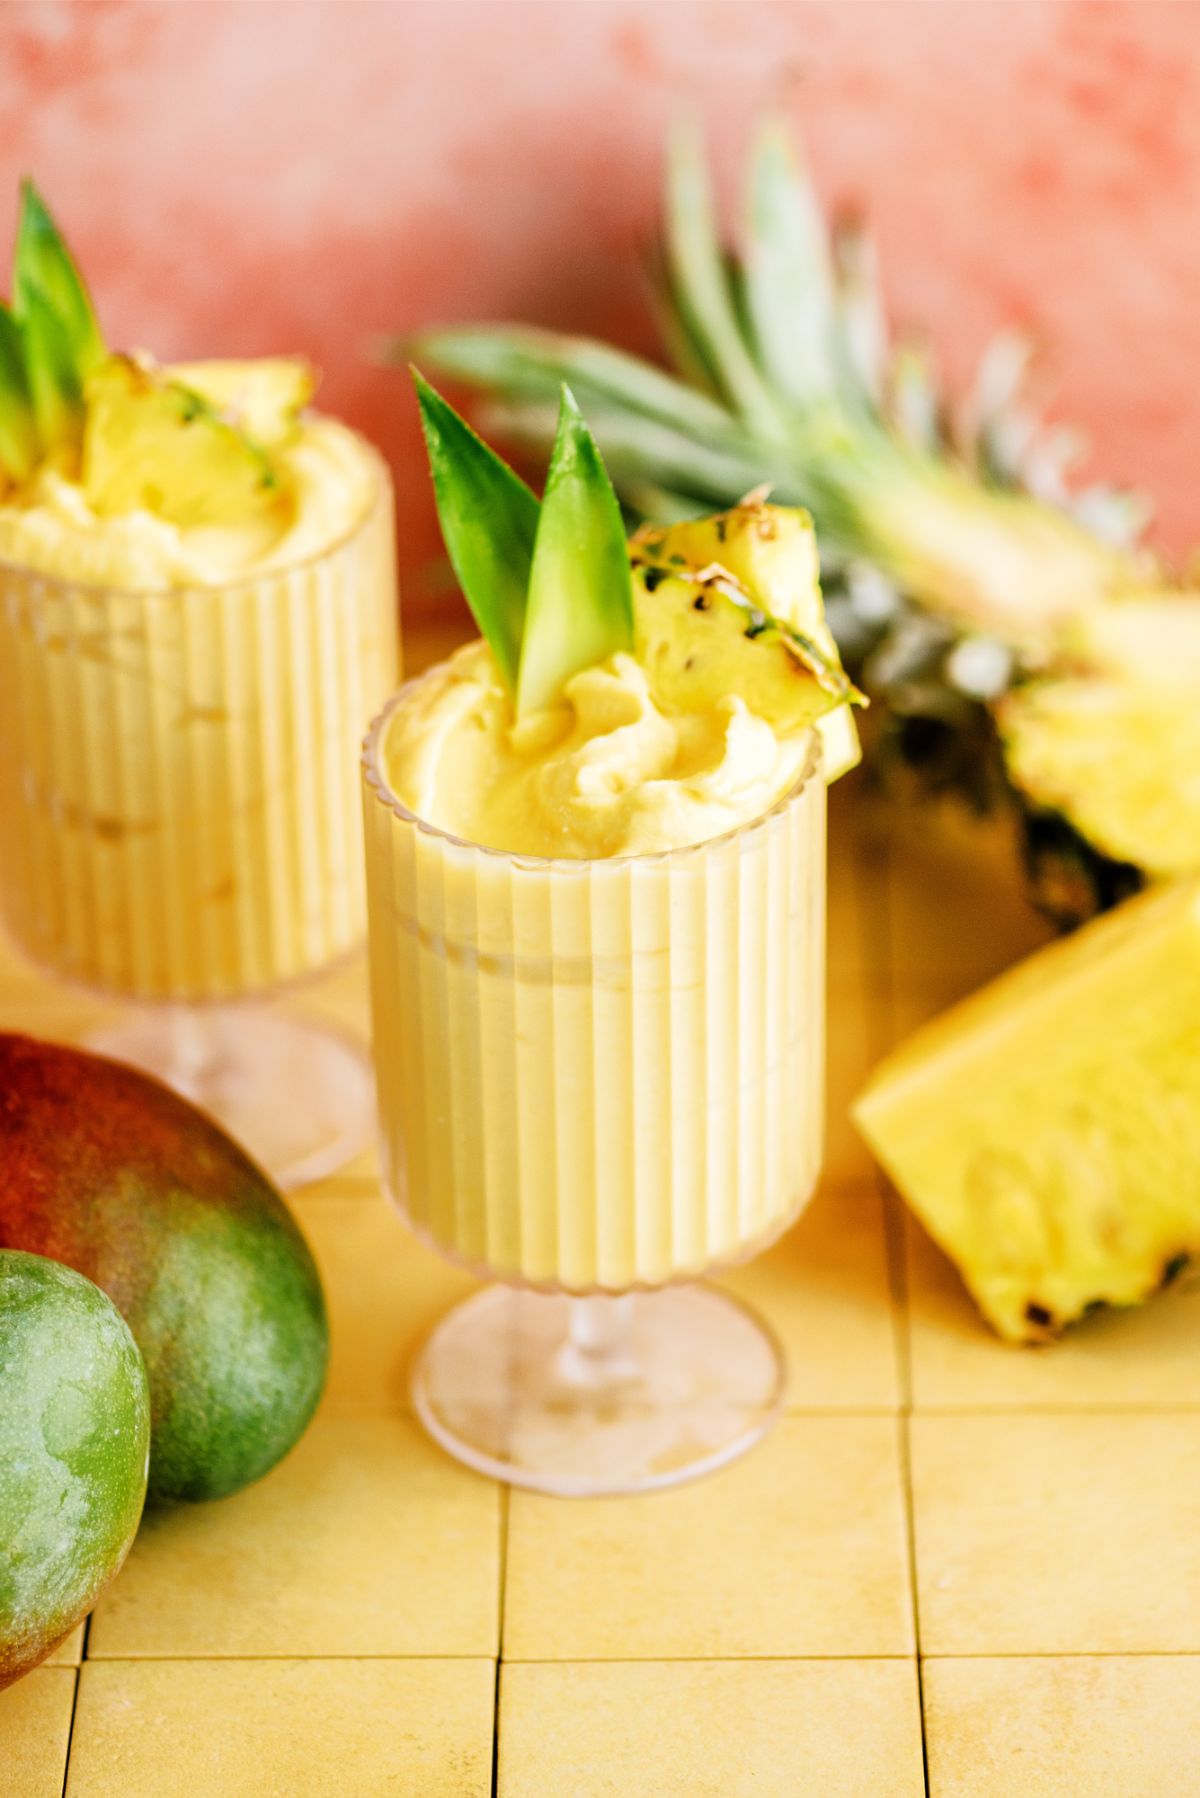 Mango and Pineapple Dole Whip in a glass surrounded by Pineapple and Mangoes